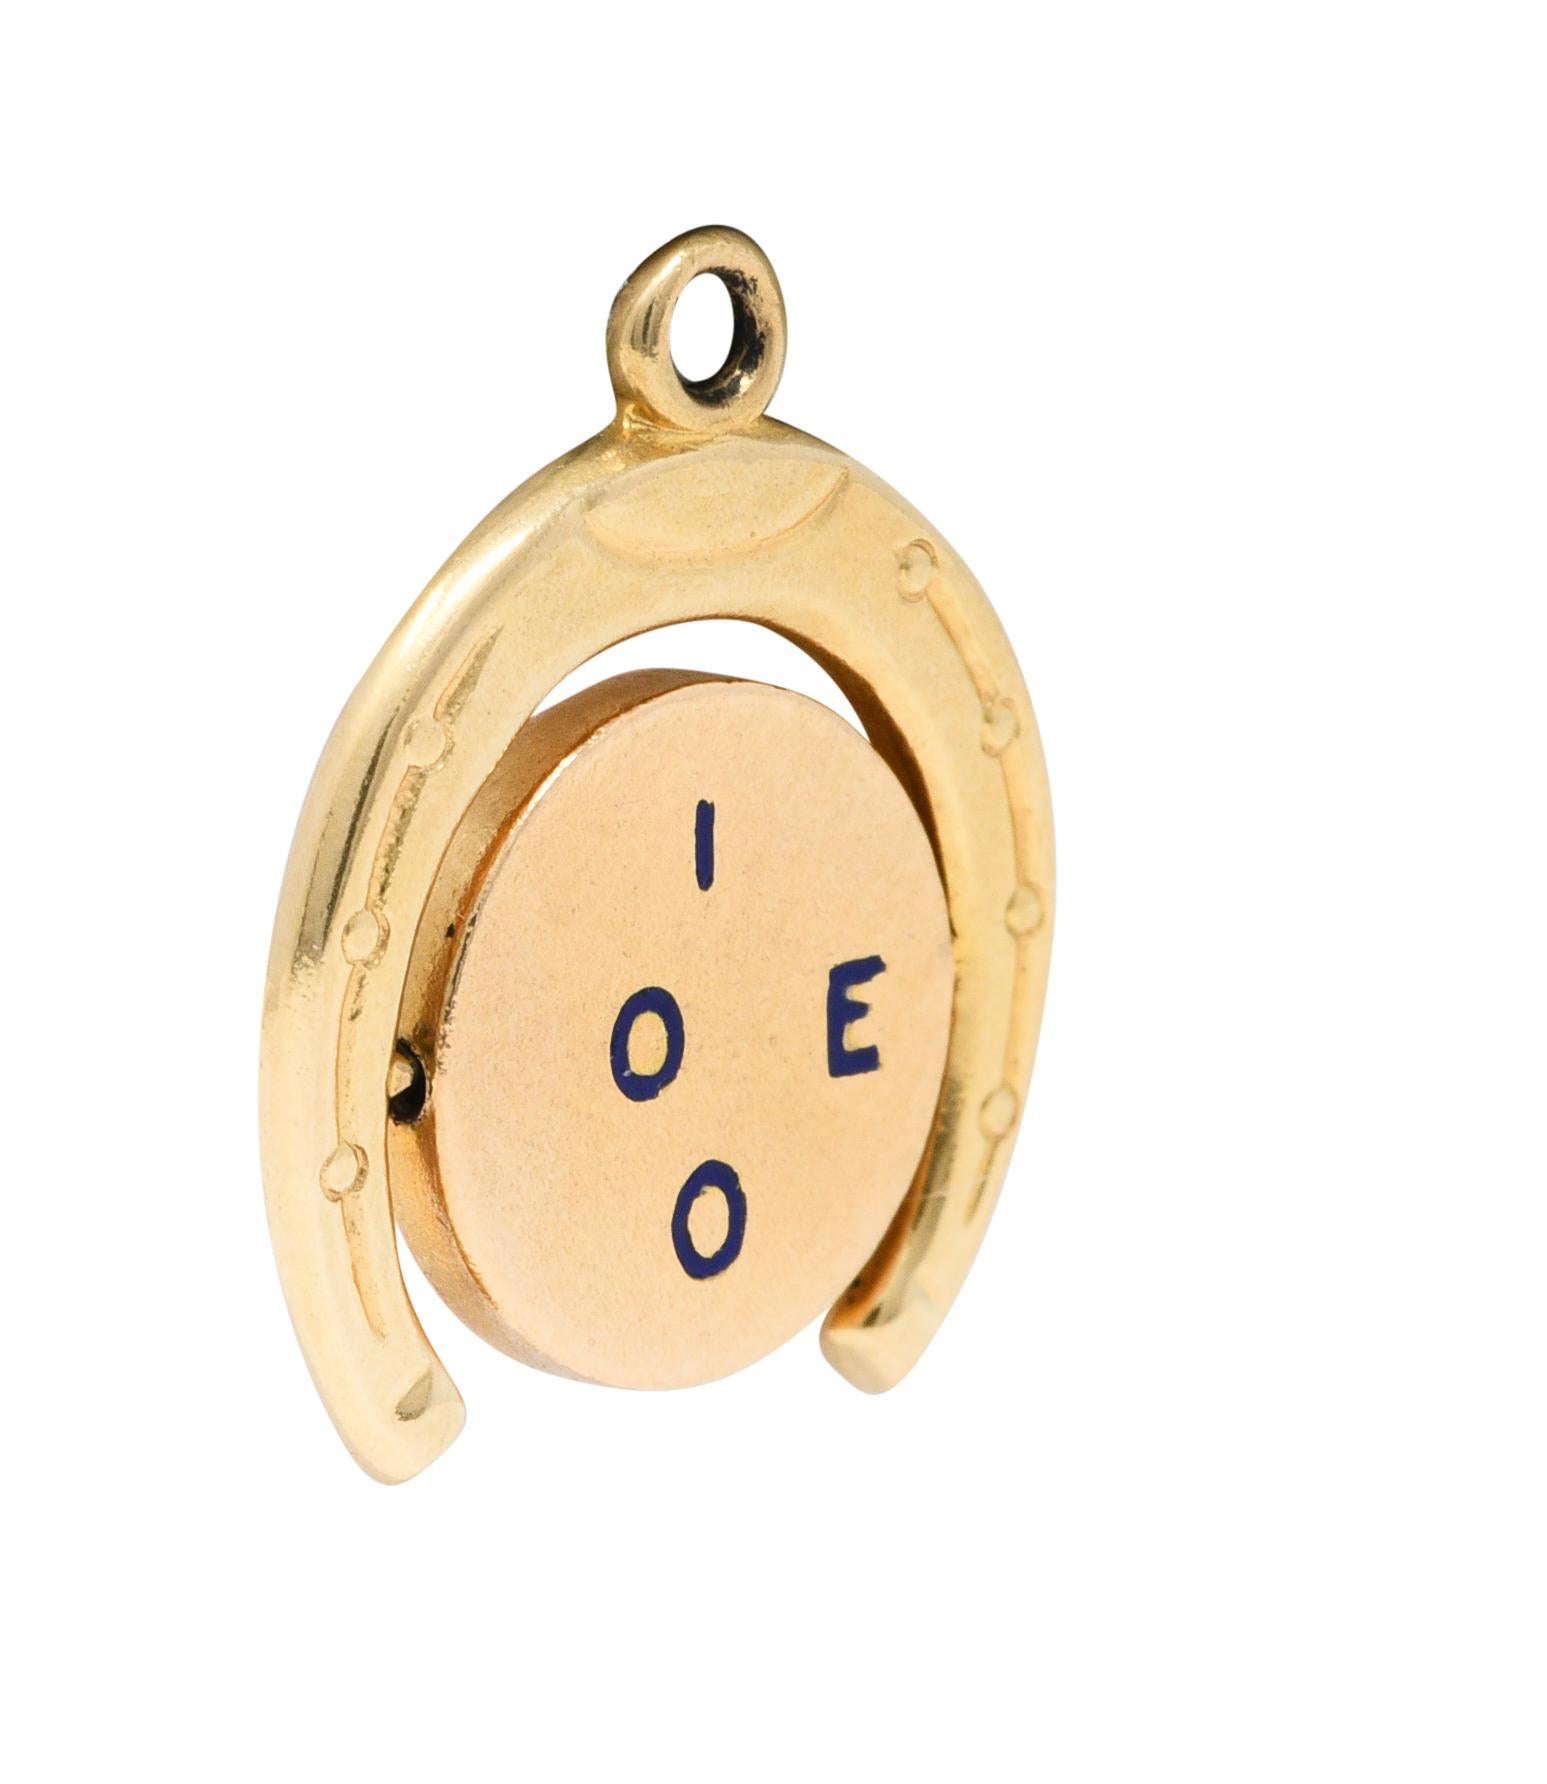 Charm is designed as a stylized horseshoe

With a rotating circular center

Emblazoned by royal blue enamel letters

That spell 'I Love You' when spun - thaumatrope illusion

Stamped 14K for 14 karat gold

Circa: 1940s

Measures: 5/8 x 3/4 inch